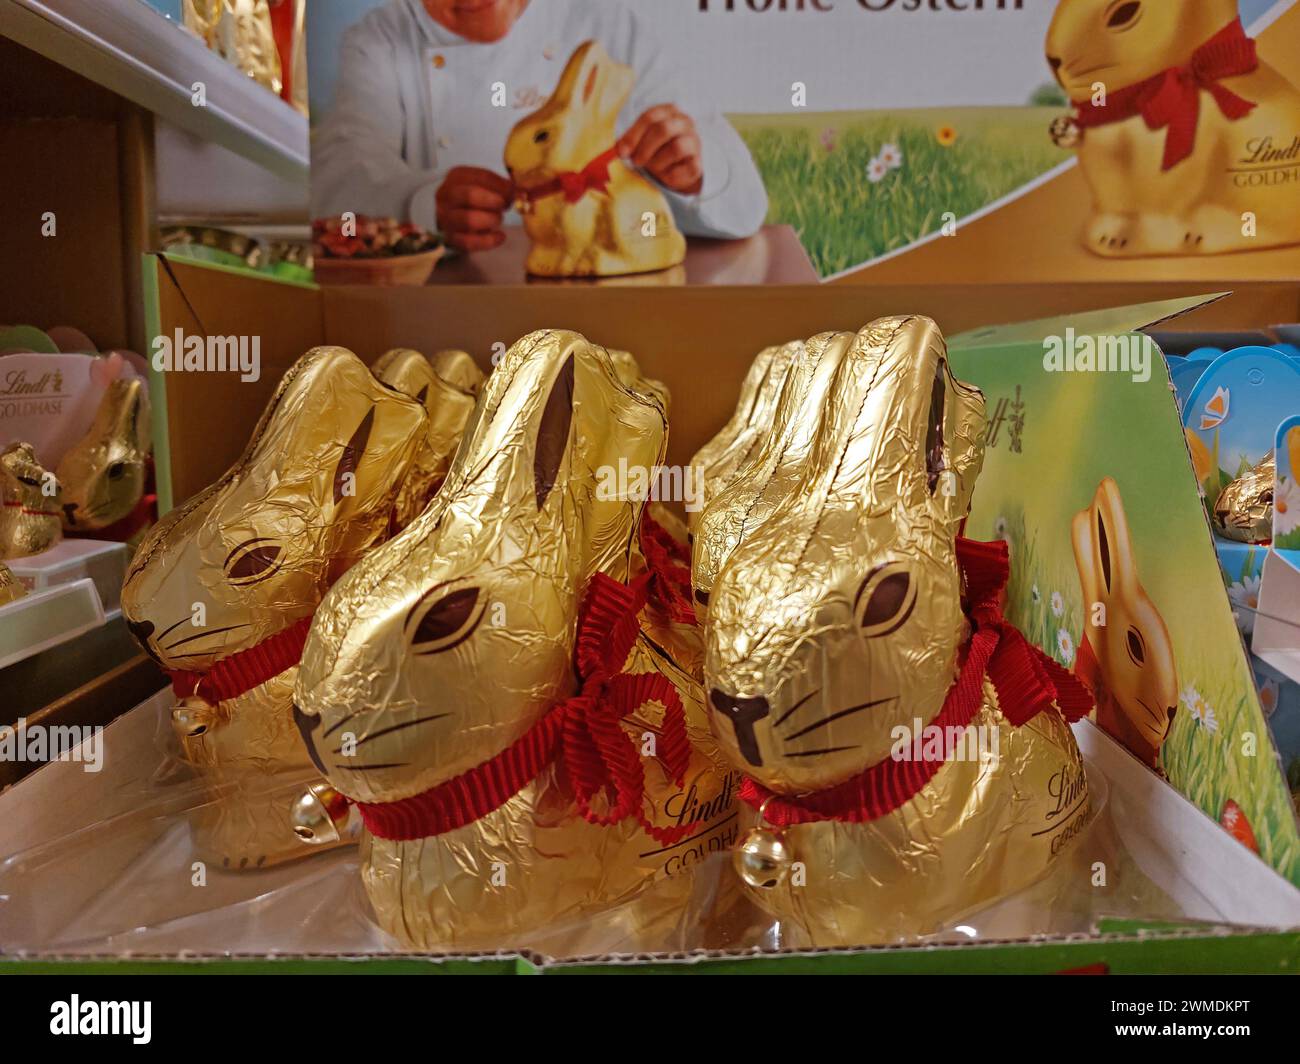 Lindt easter chocolate rabbits in a supermarket Stock Photo